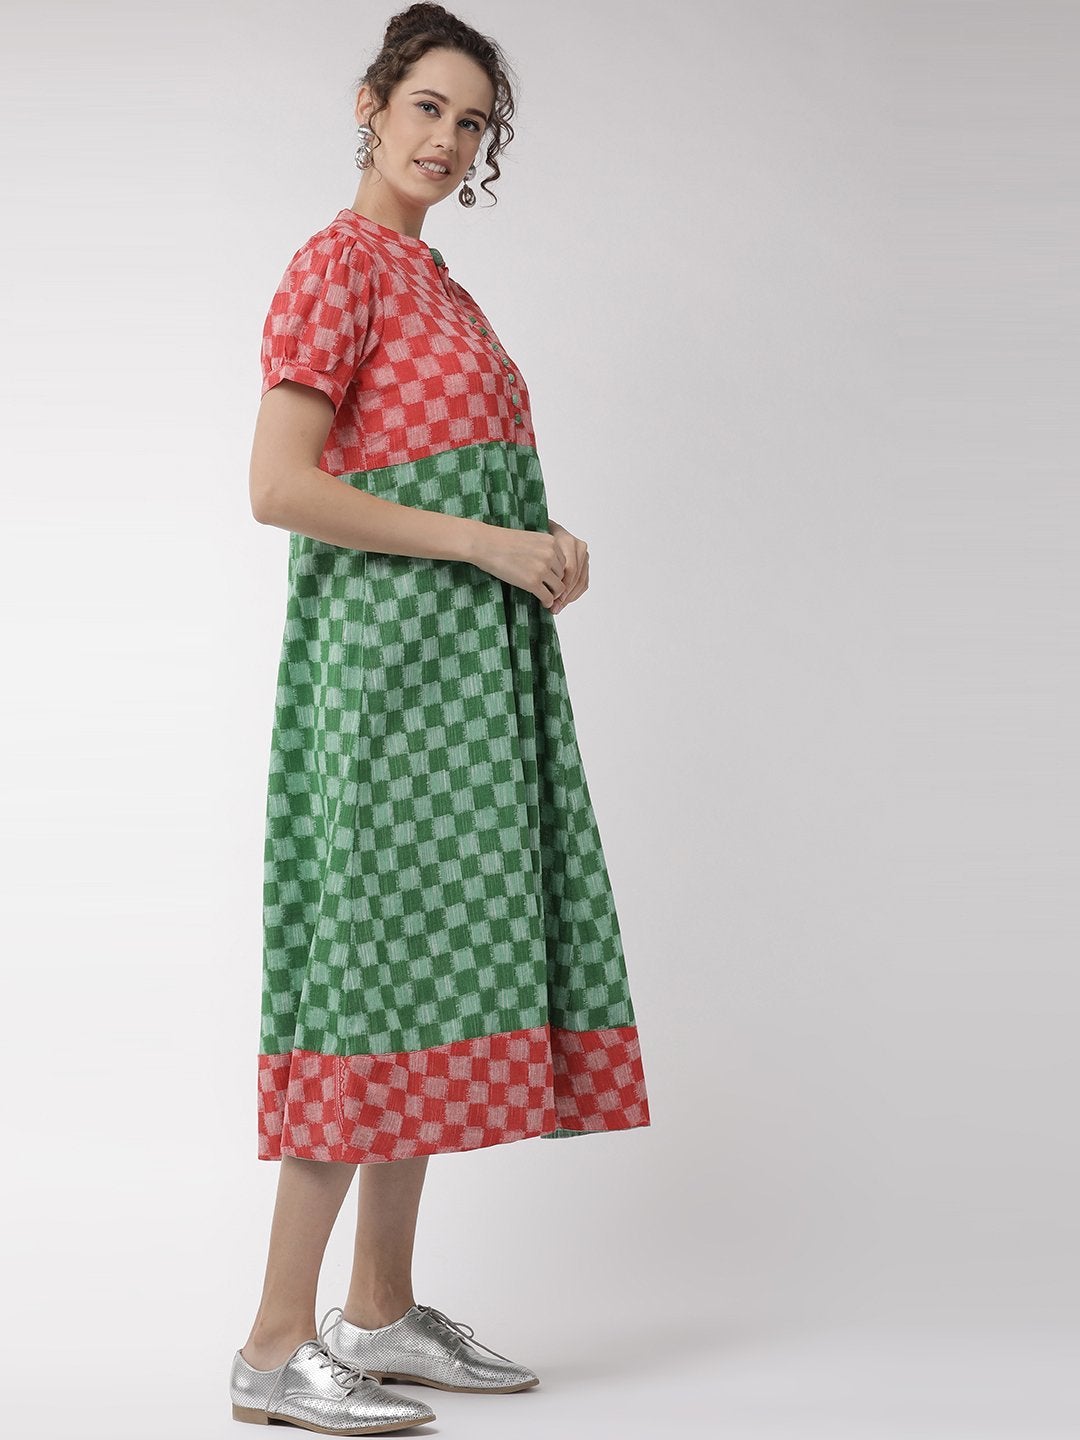 Women's Red And Green Dress - InWeave